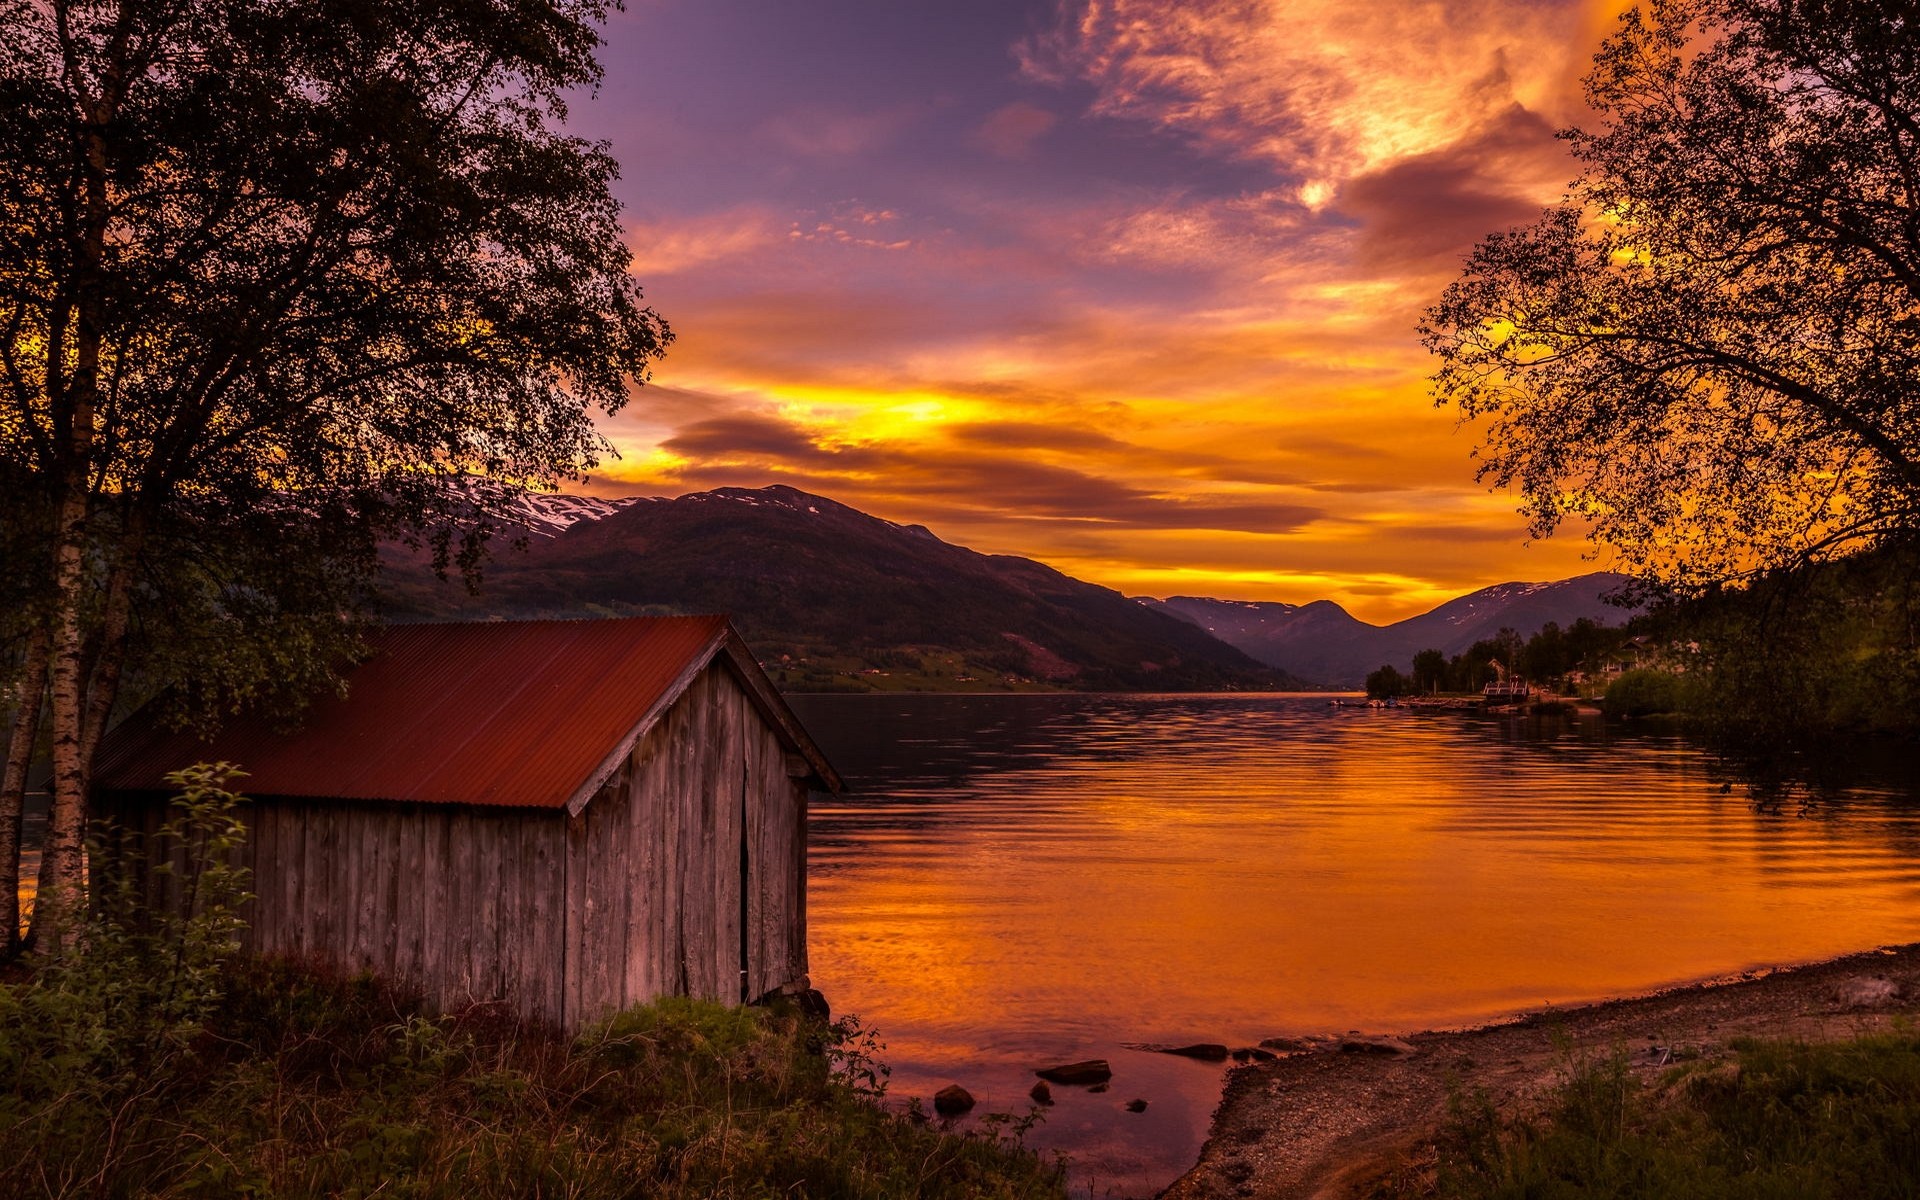 General 1920x1200 nature landscape boathouses lake sunset Norway trees mountains sky clouds shrubs water gold orange sky low light